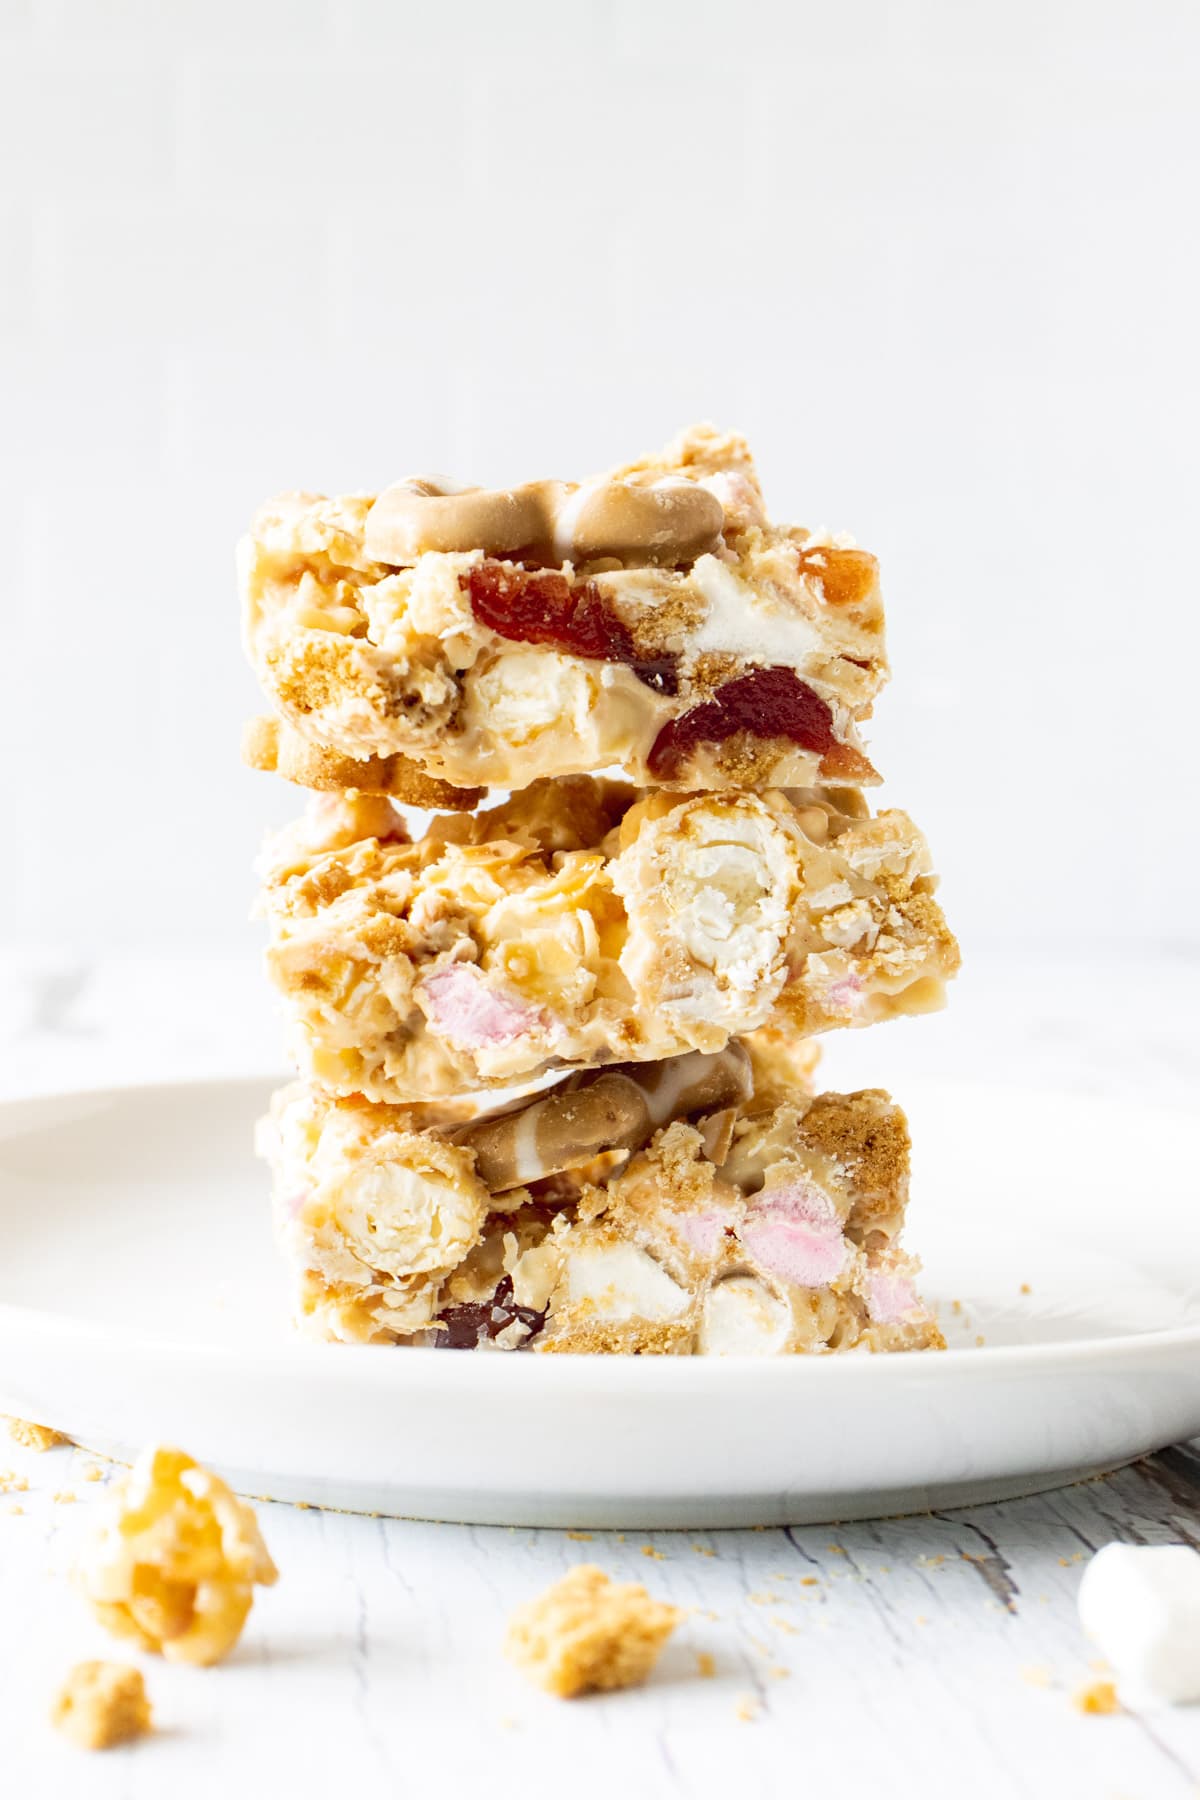 Stack of fridge cake slices filled with marshmallows, popcorn and cherries